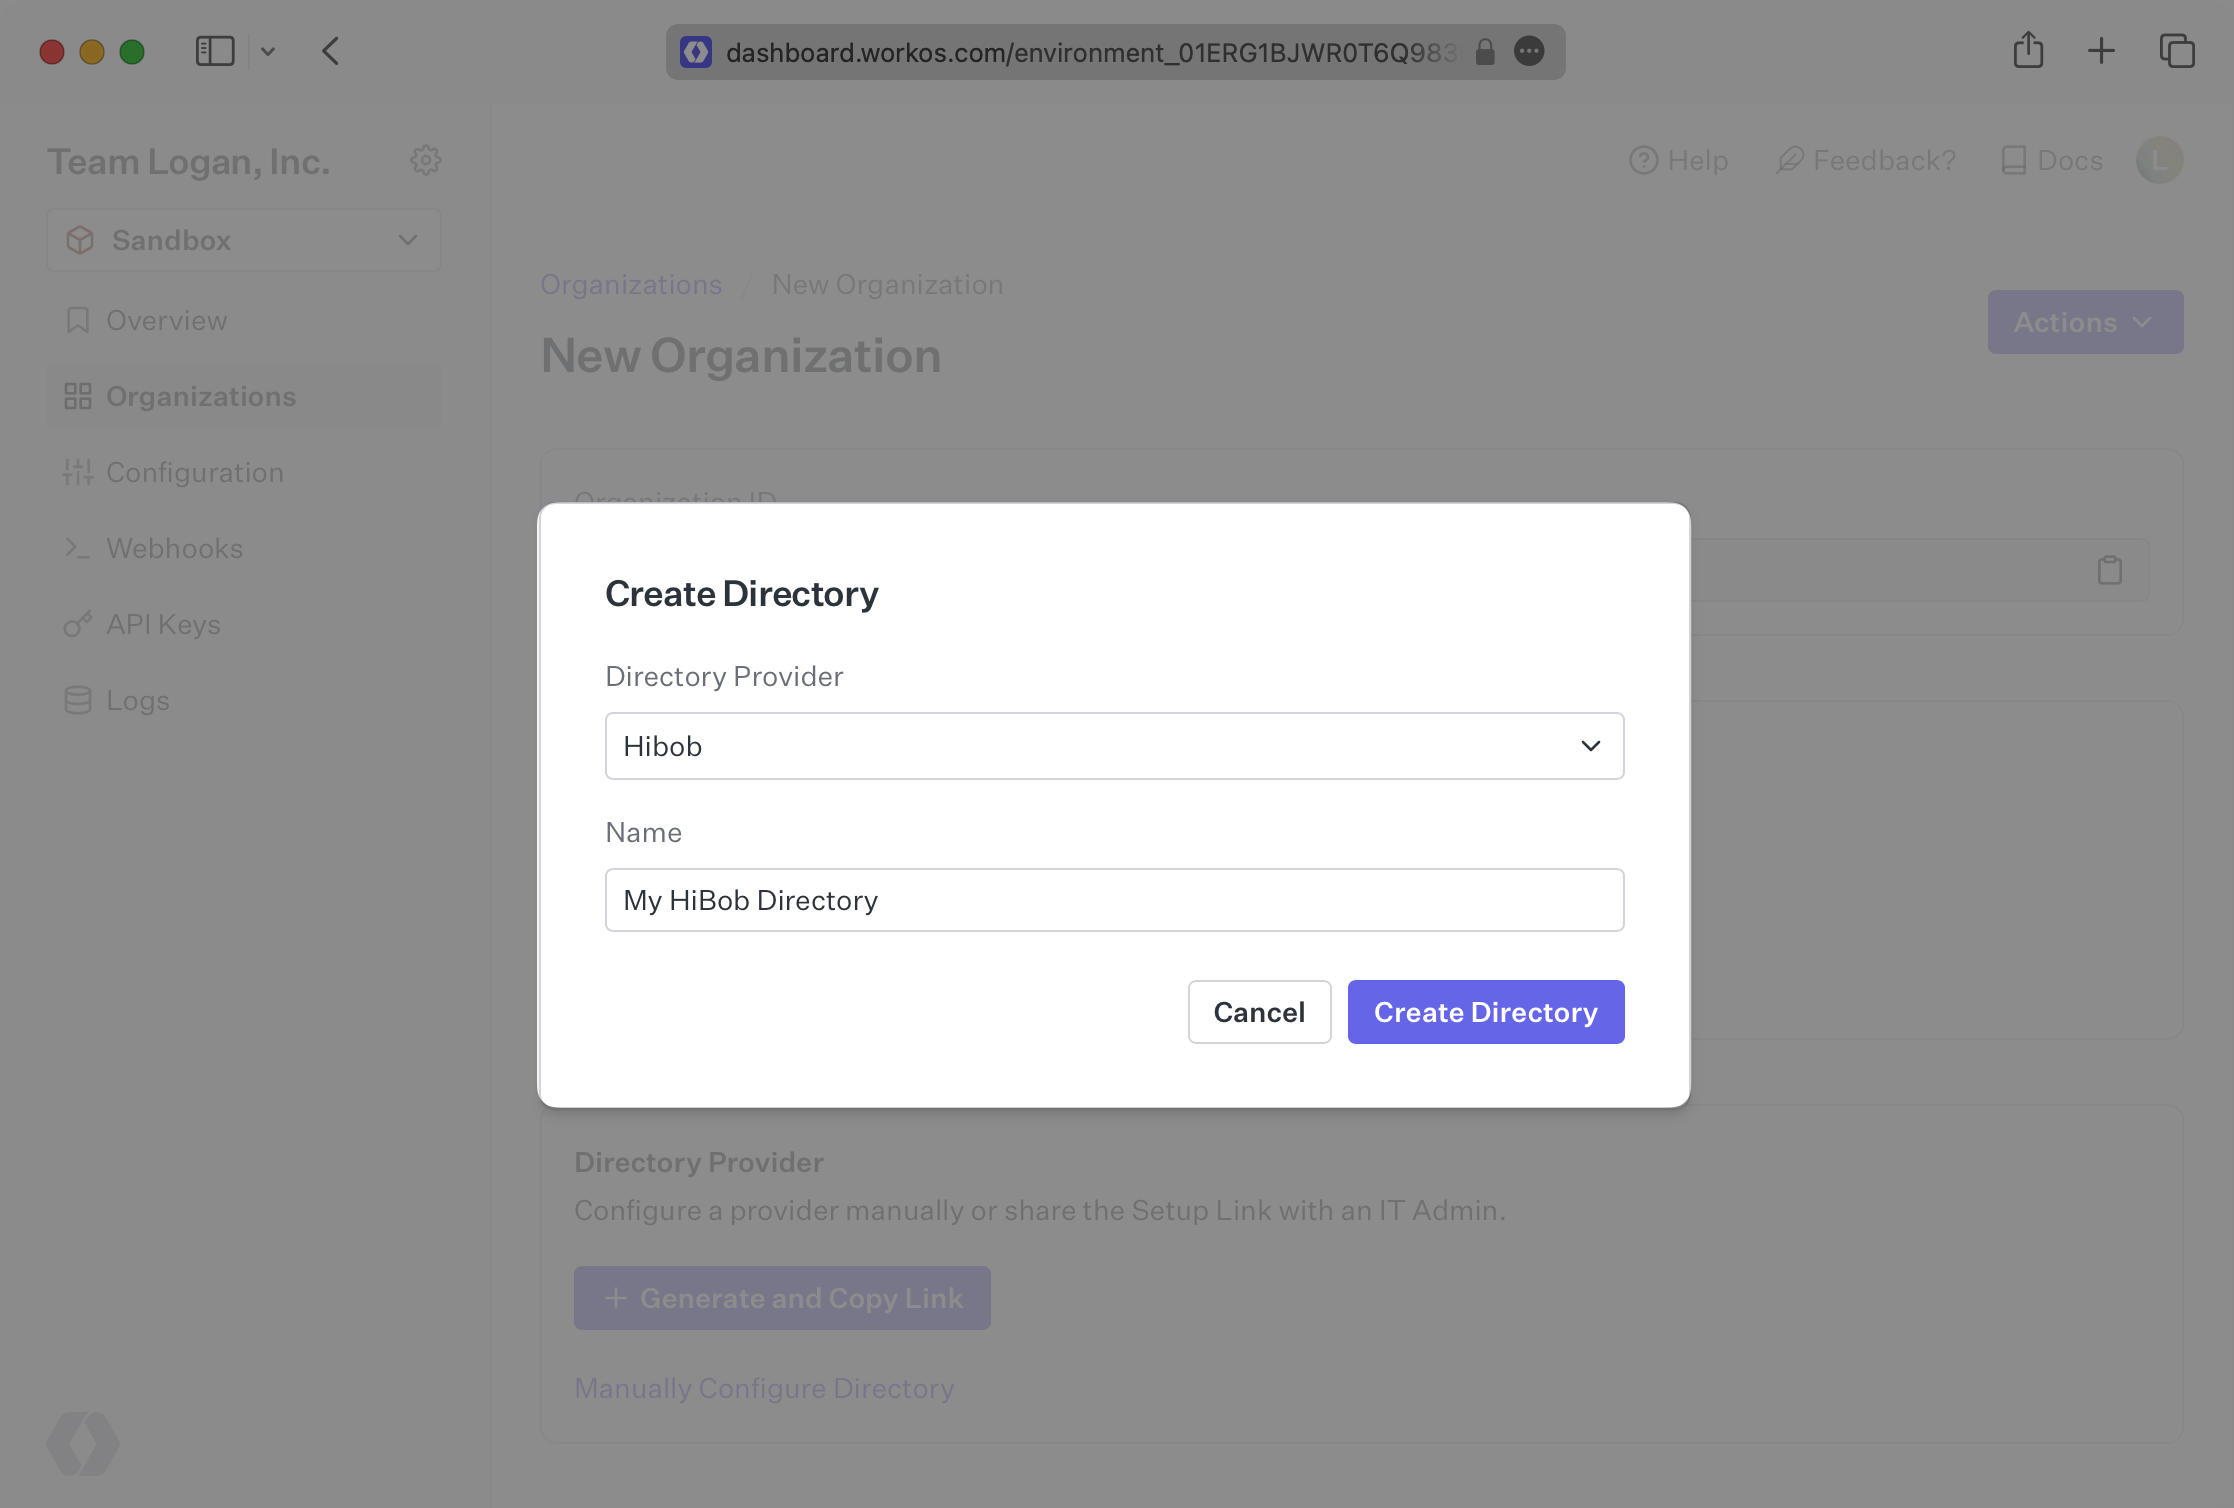 A screenshot highlighting the "Create Directory" modal for creating a HiBob directory in the WorkOS Dashboard.